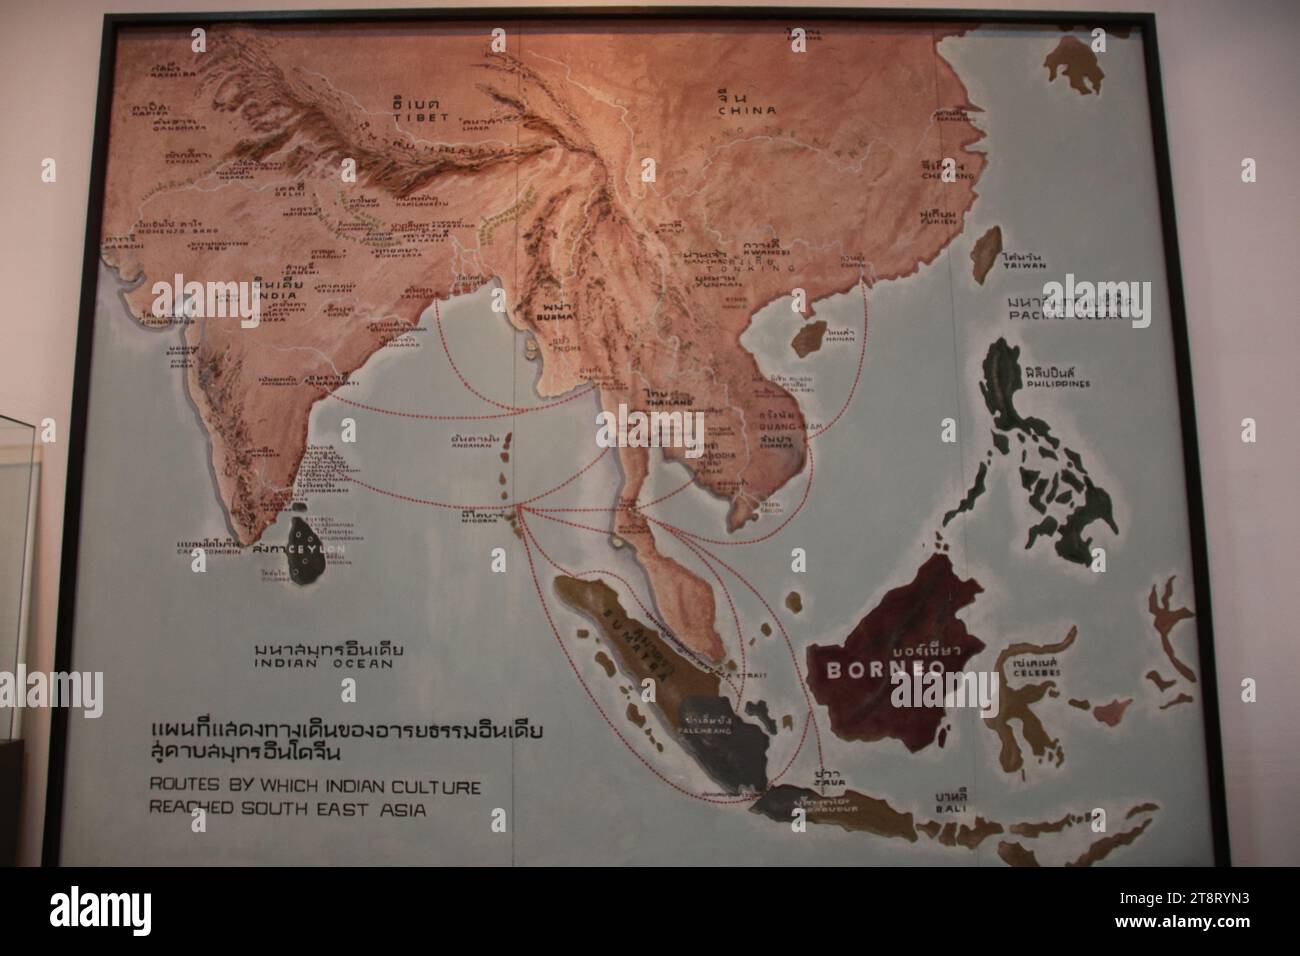 Map of Routes by Which Indian Culture Reached Southeast Asia, National Museum of Thailand, Bangkok Stock Photo